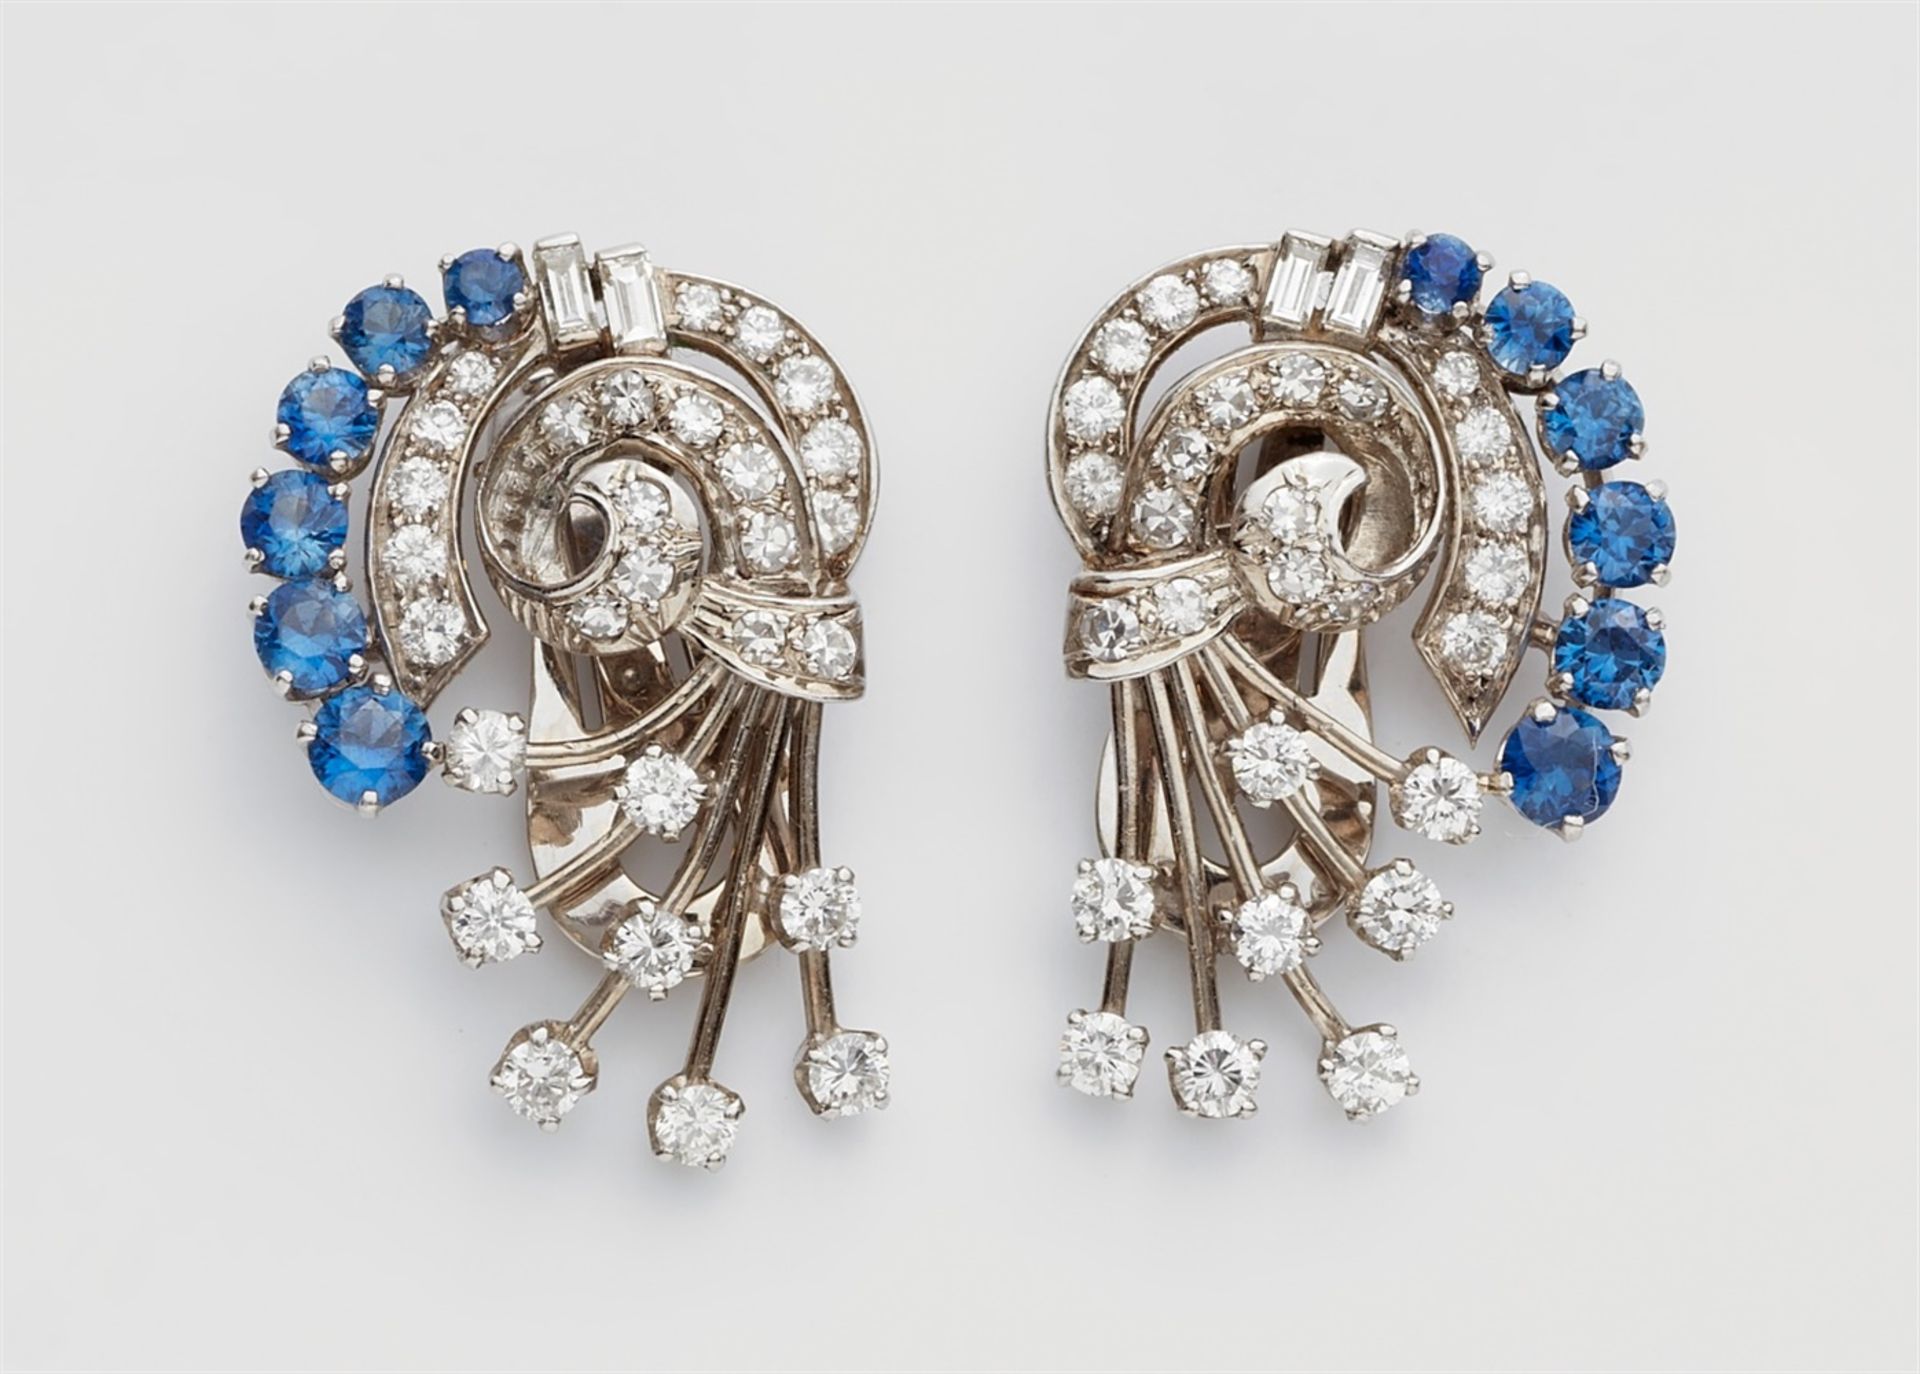 A pair of sapphire clip earringsPlatinum earrings with 14k white gold clip findings. Designed as